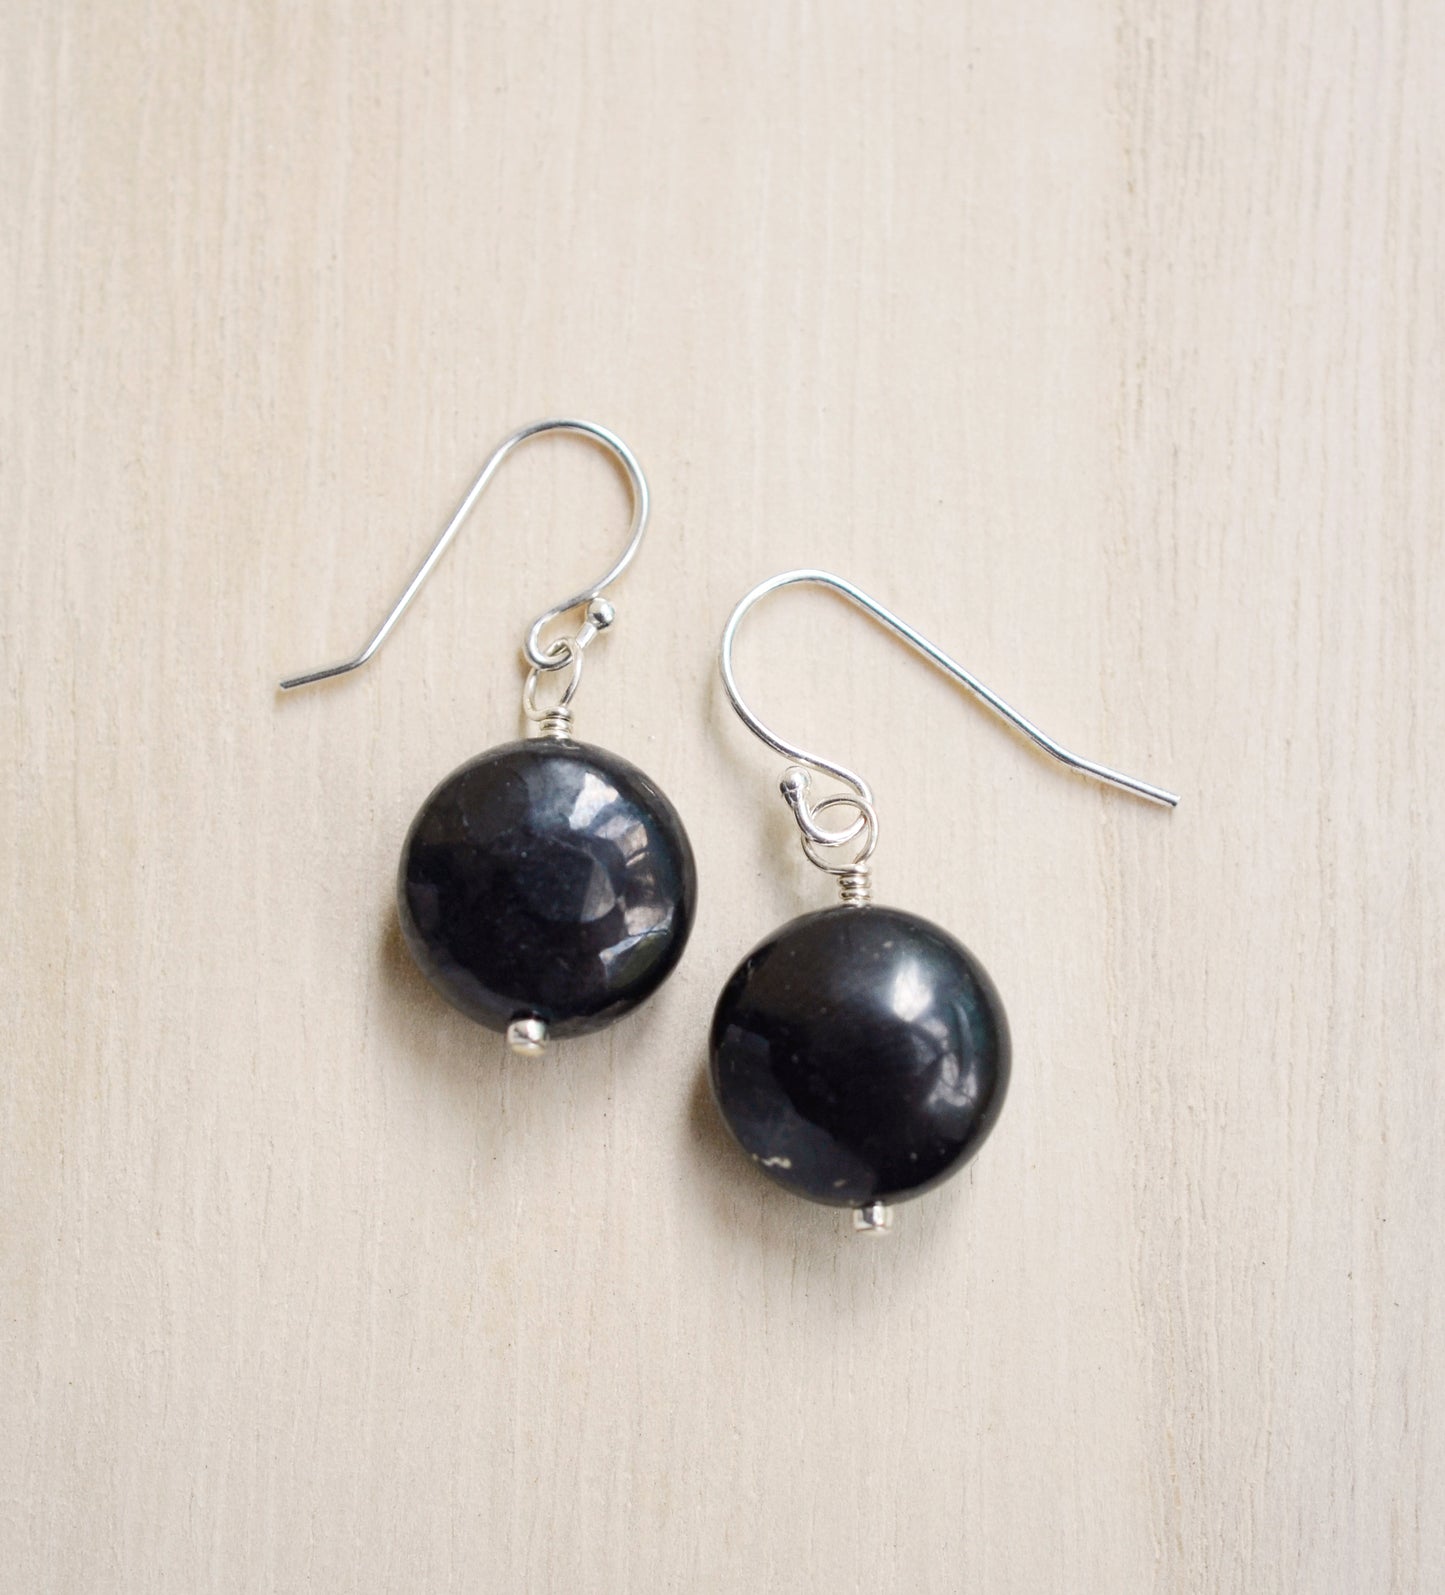 Natural smooth polished coin shape black Shungite dangle from sterling silver earring hooks. 